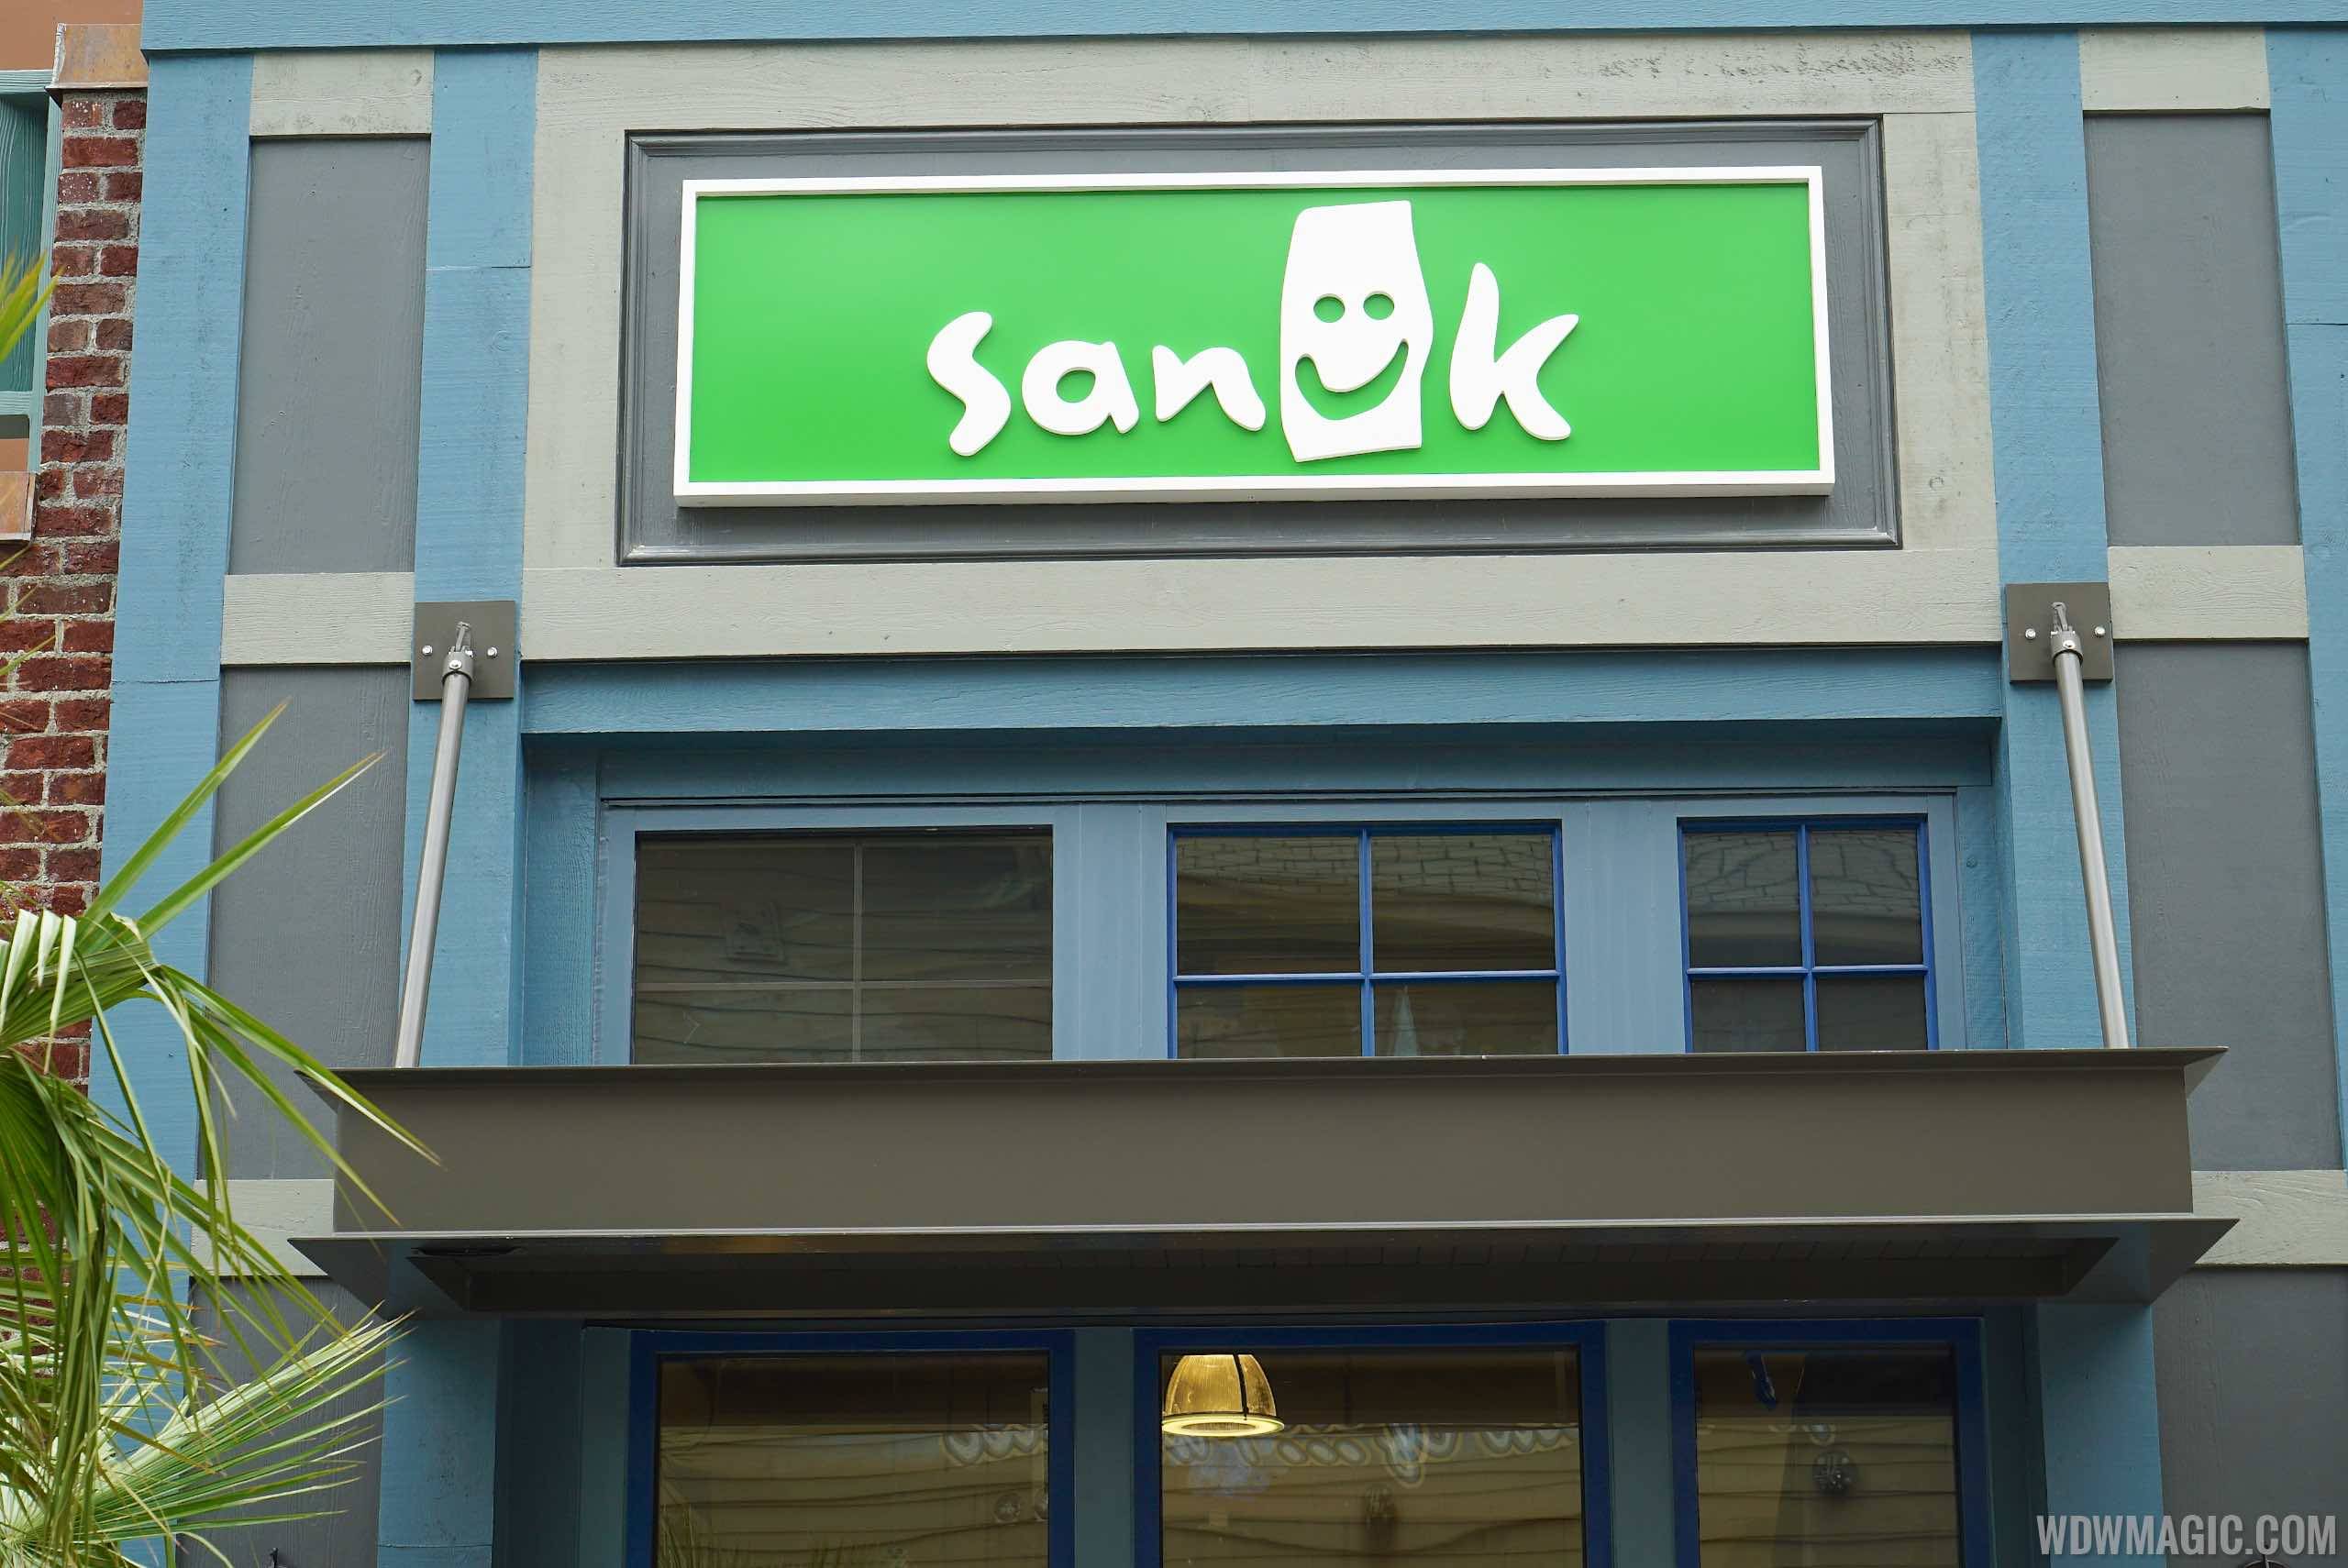 PHOTOS - Signage goes up at new Sanuk store in Disney Springs